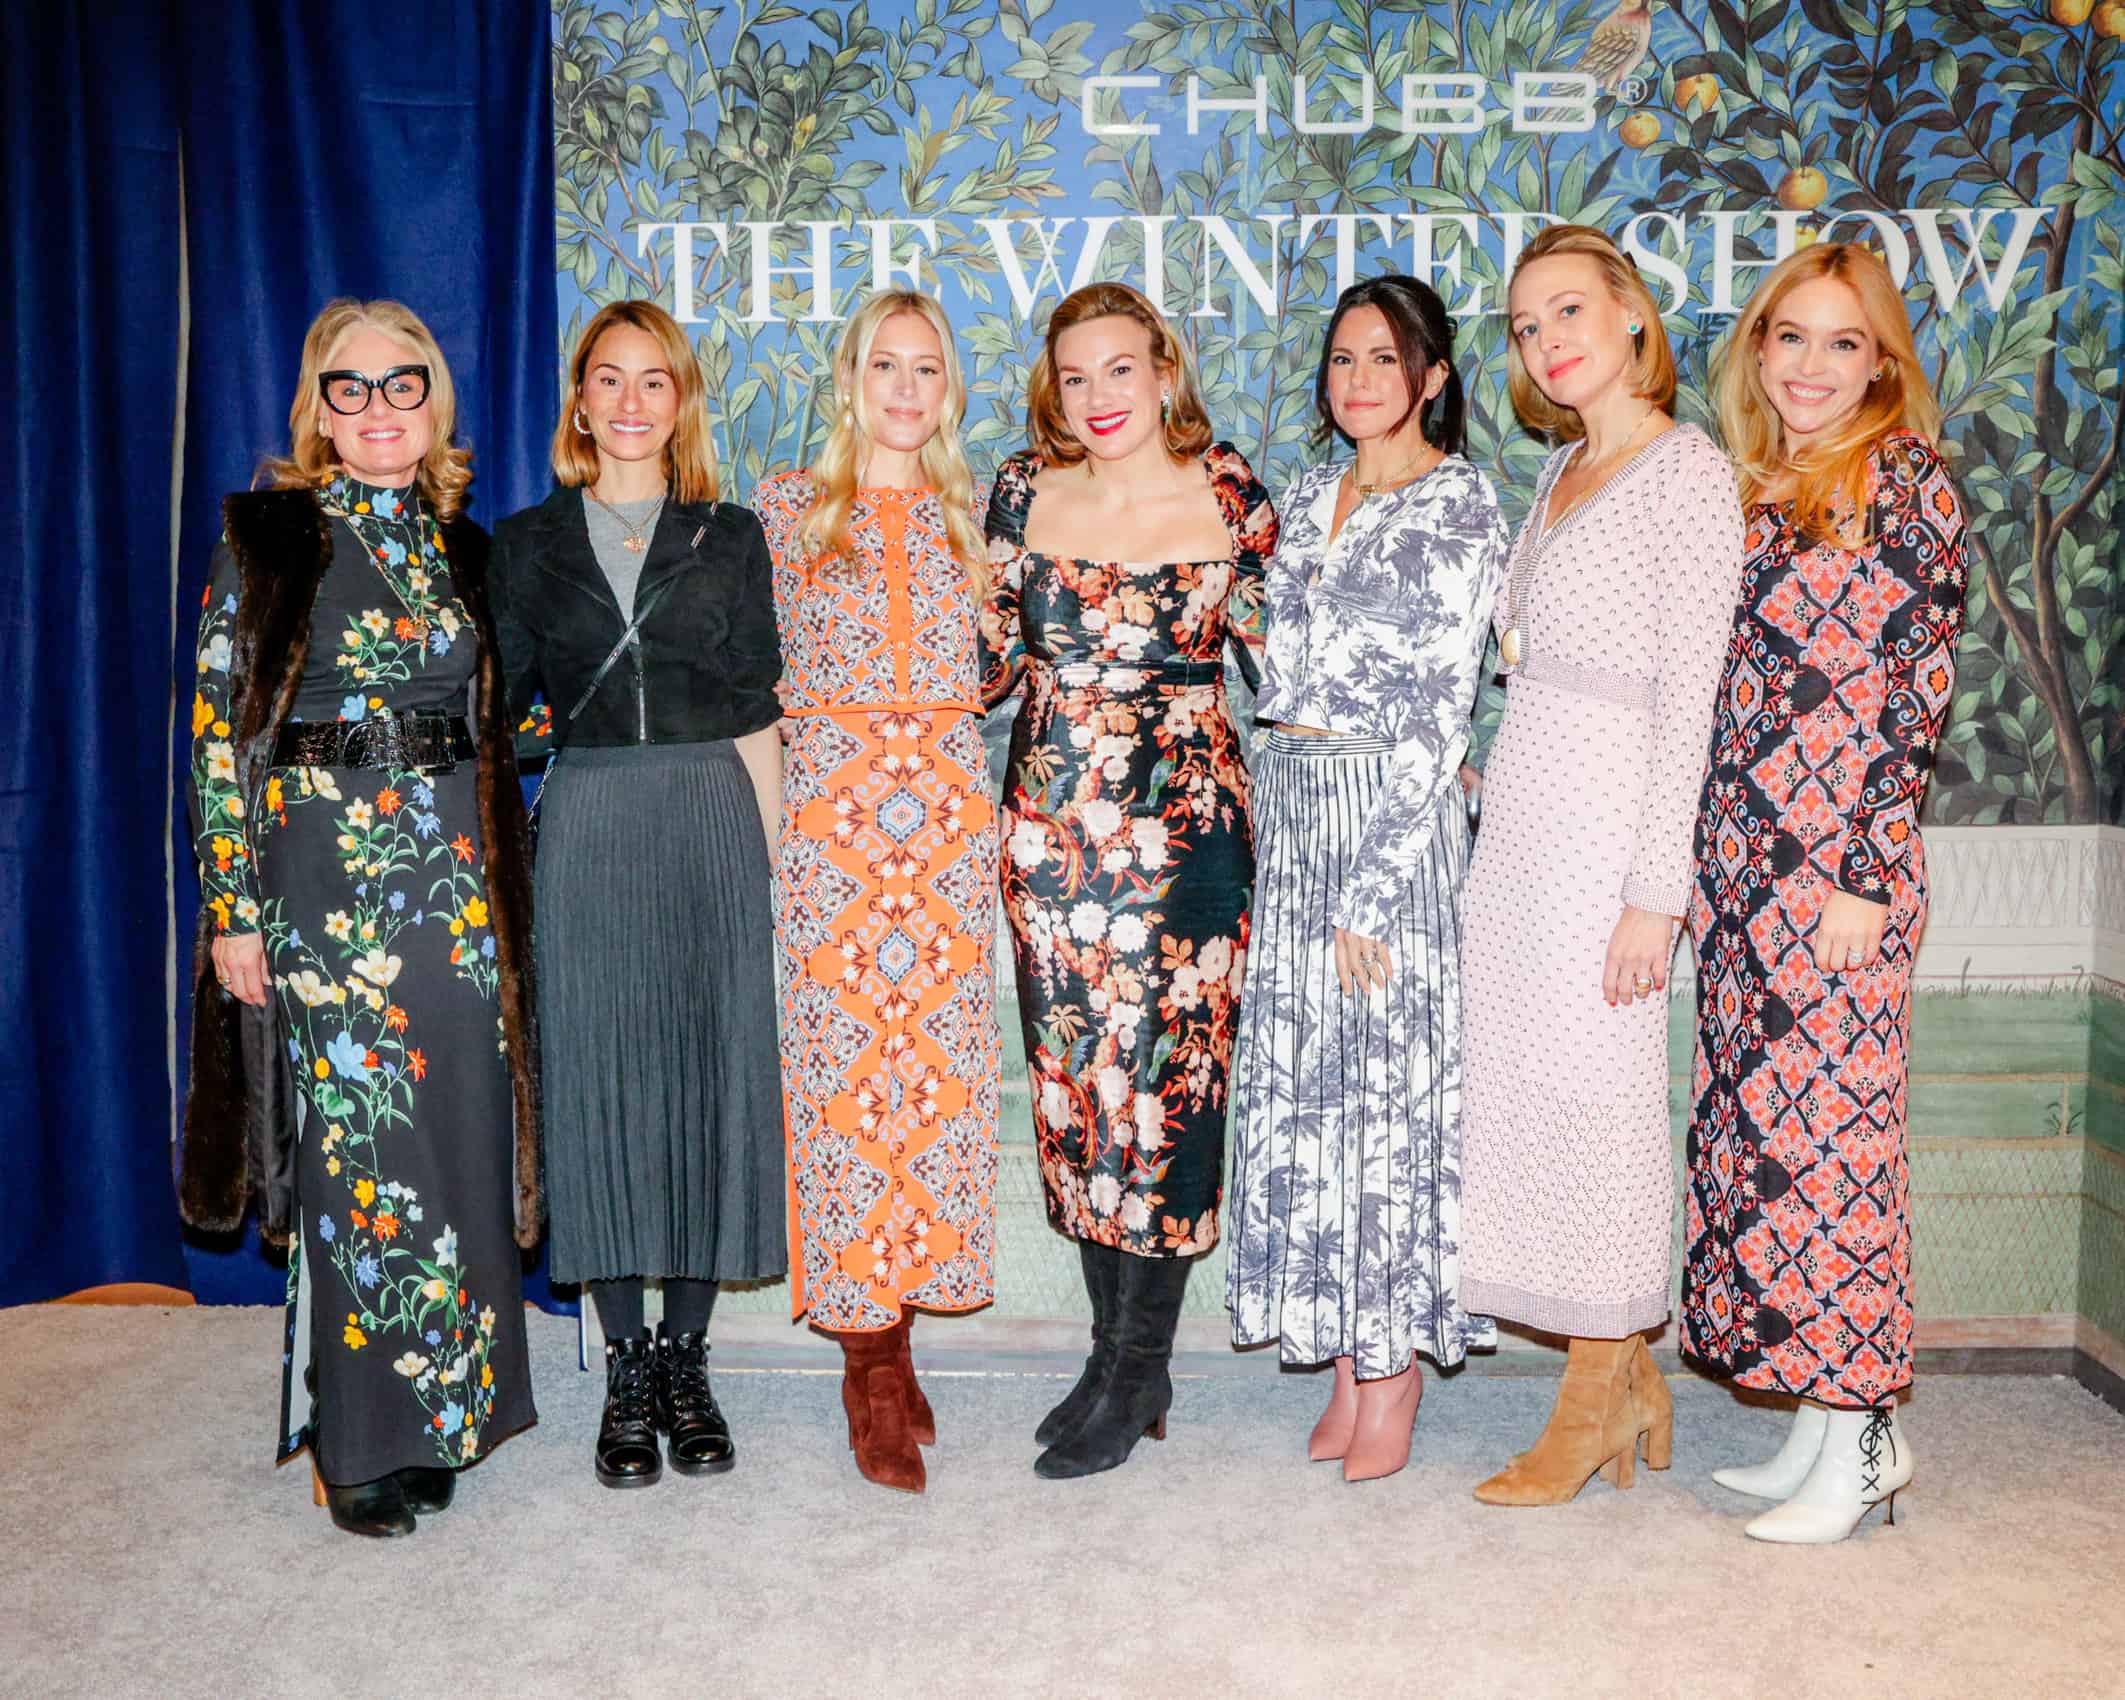 Inside The Winter Show’s Chic Design Luncheon